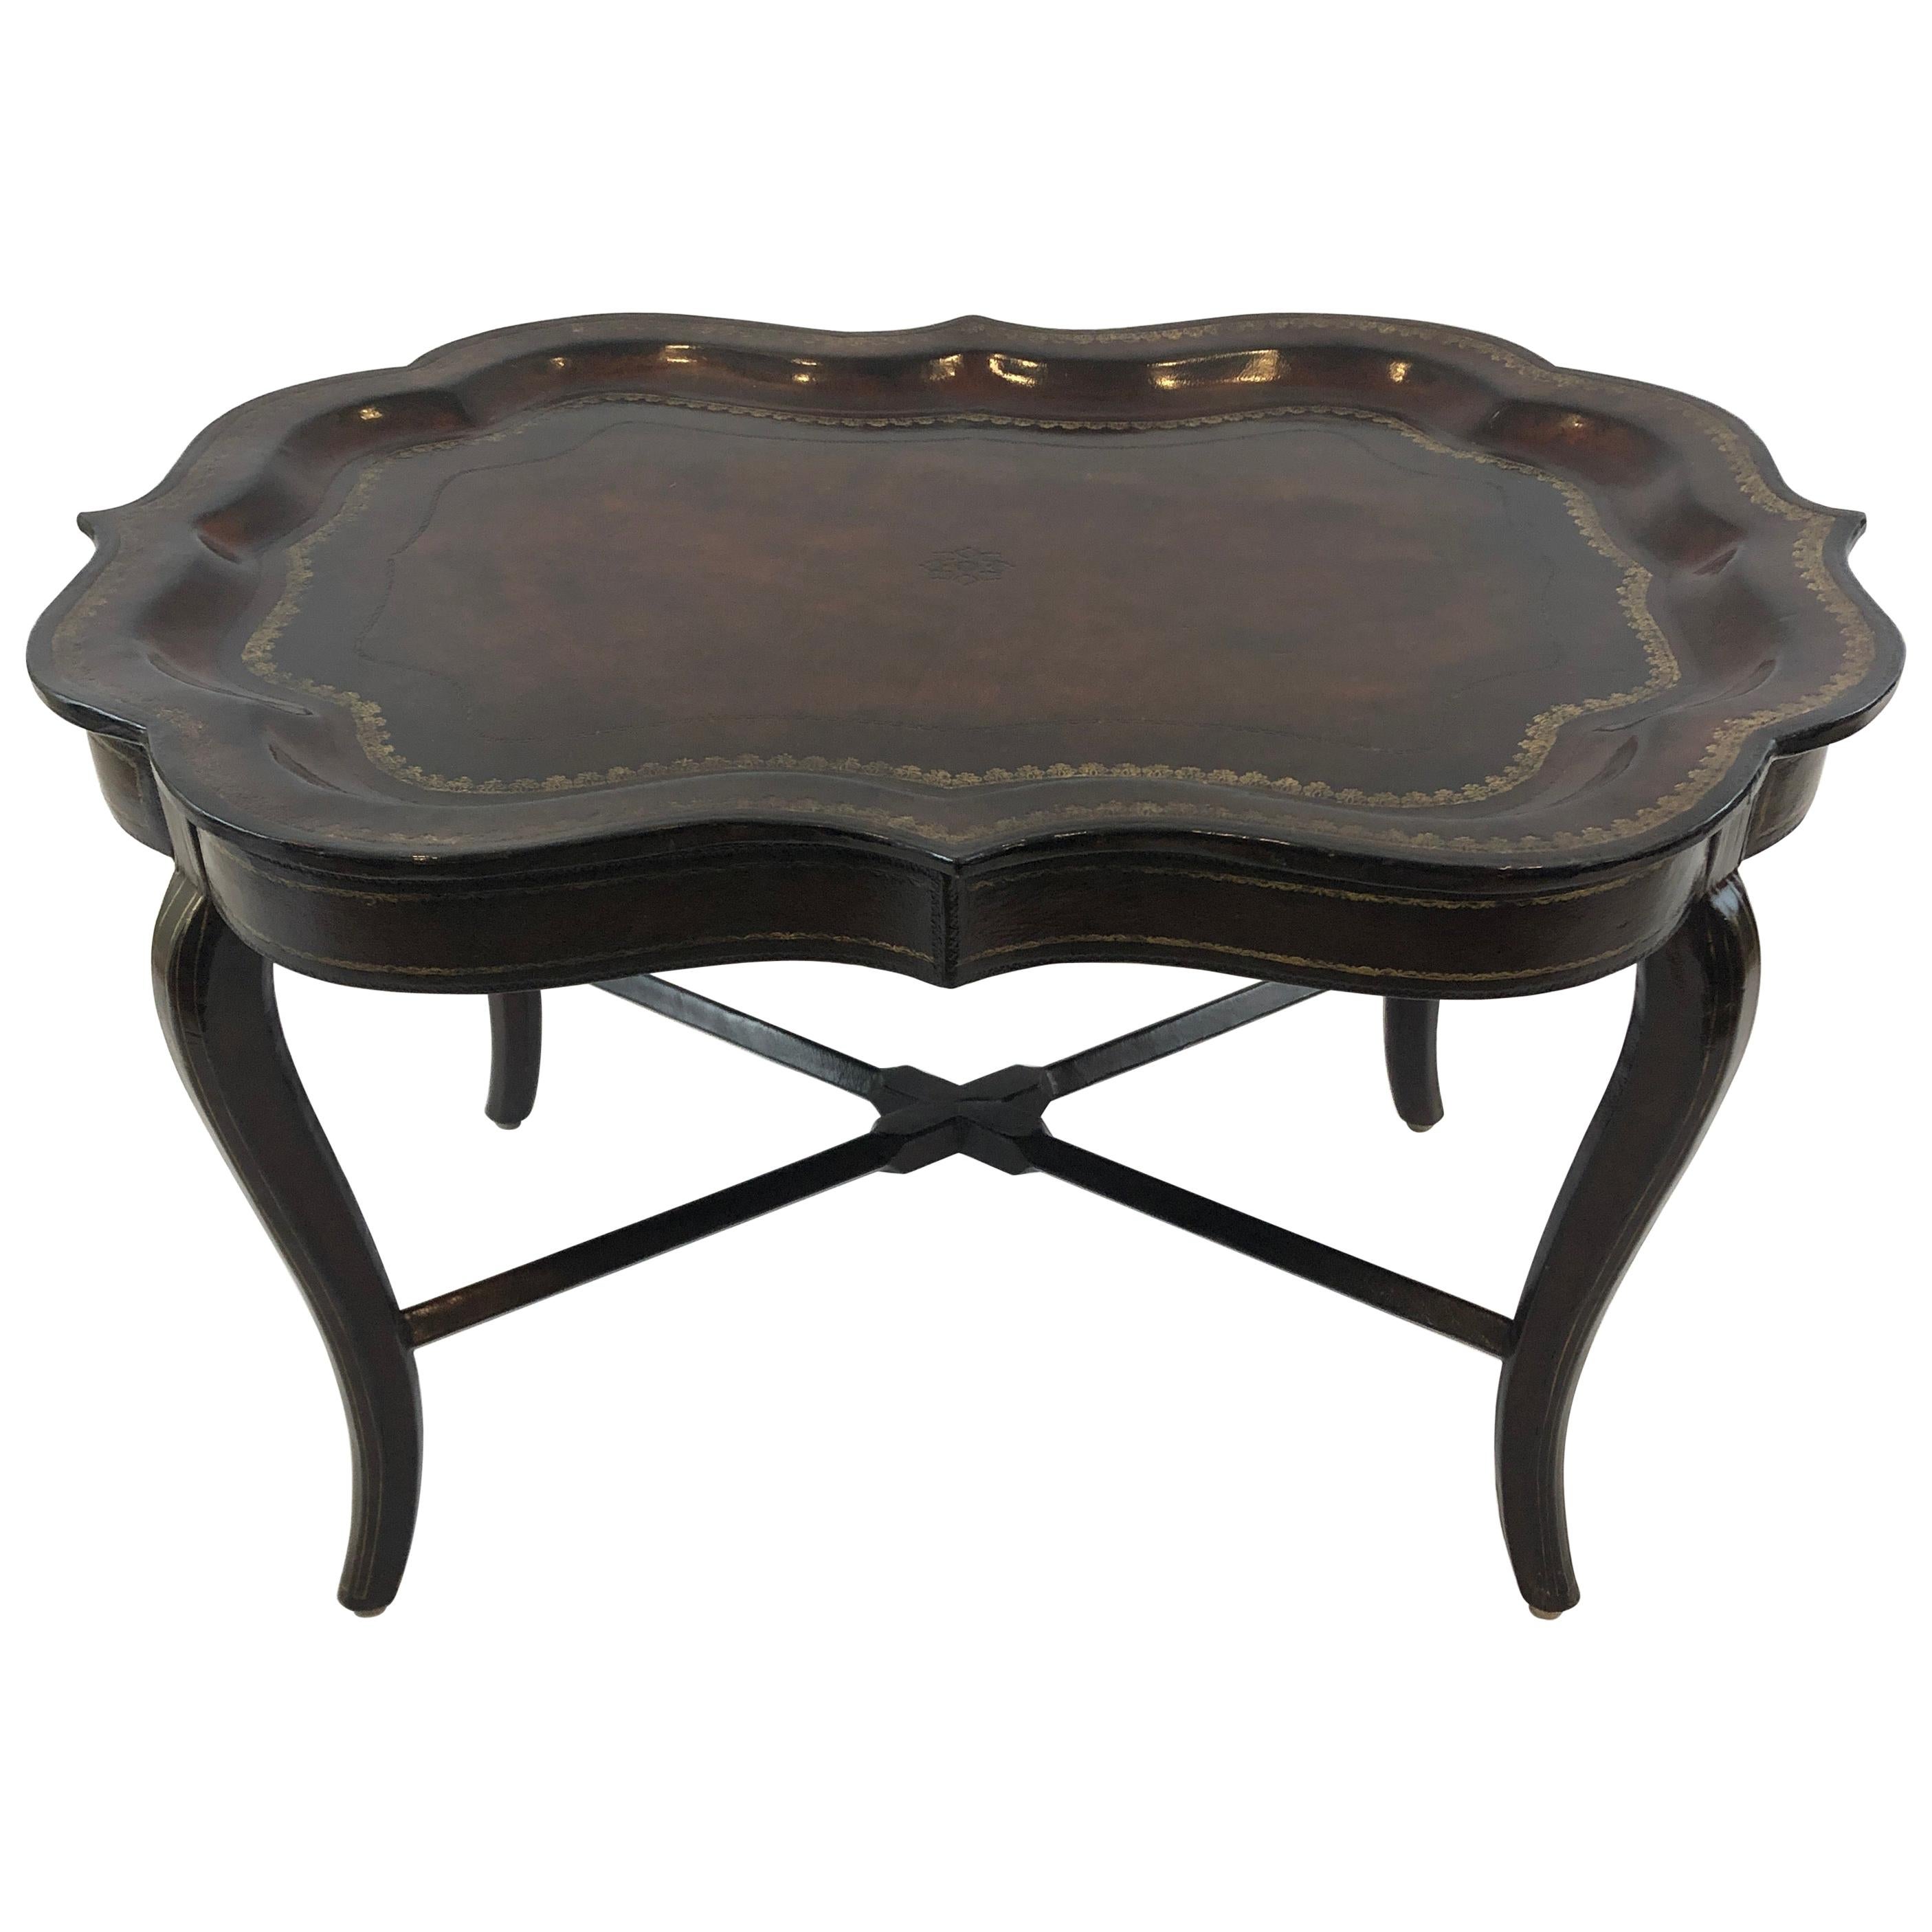 Sublimely Crafted Leather Wrapped Tray Coffee Table by Maitland Smith